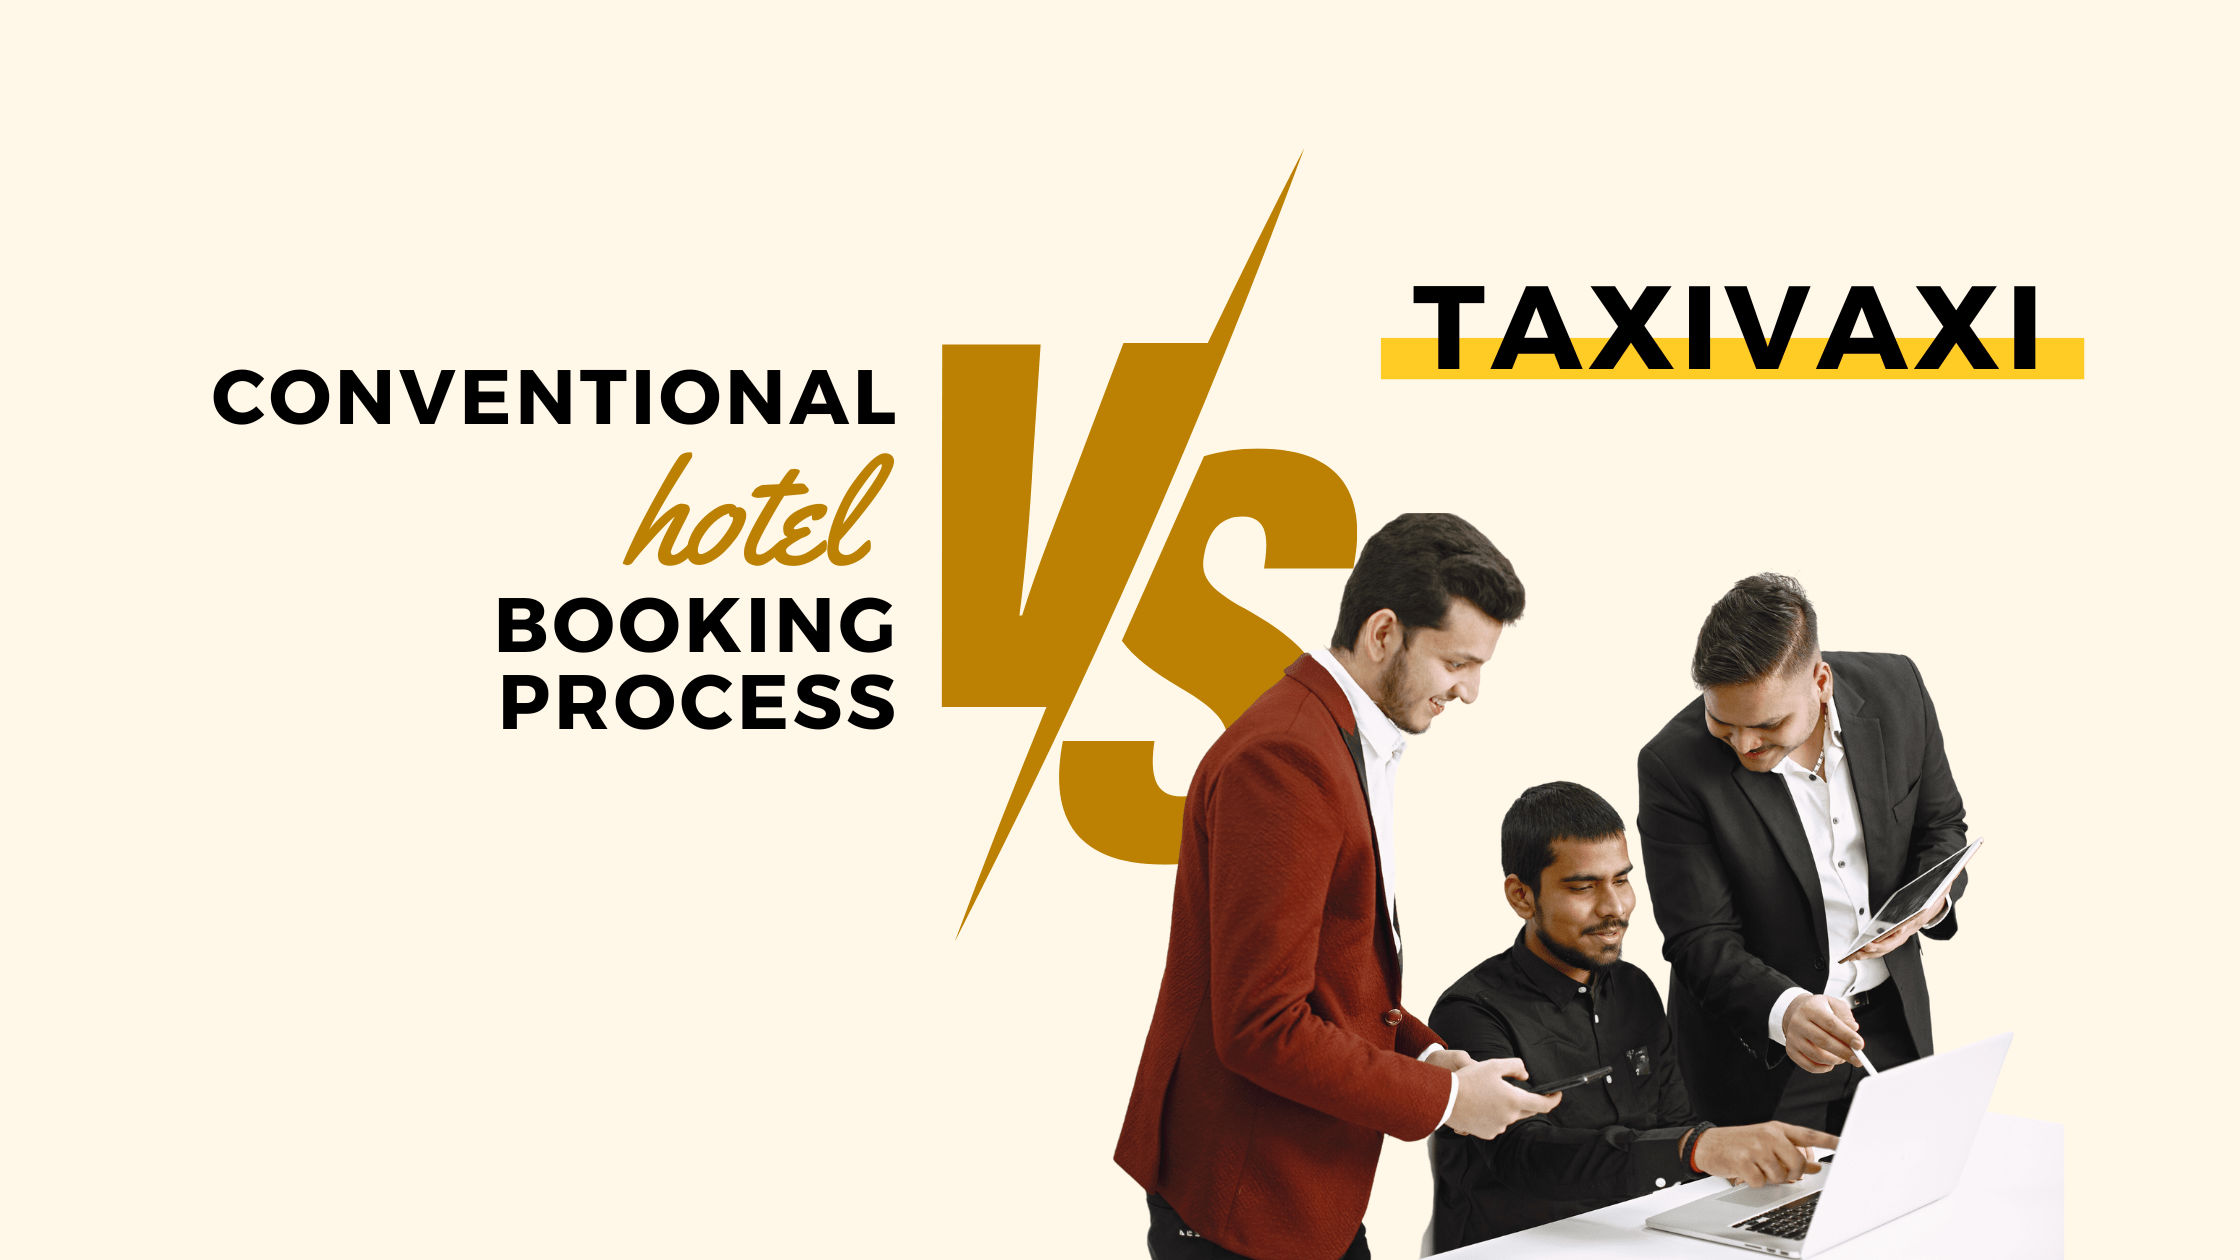 You are currently viewing Hotel Booking Process for Business Trip: Conventional Vs TaxiVaxi